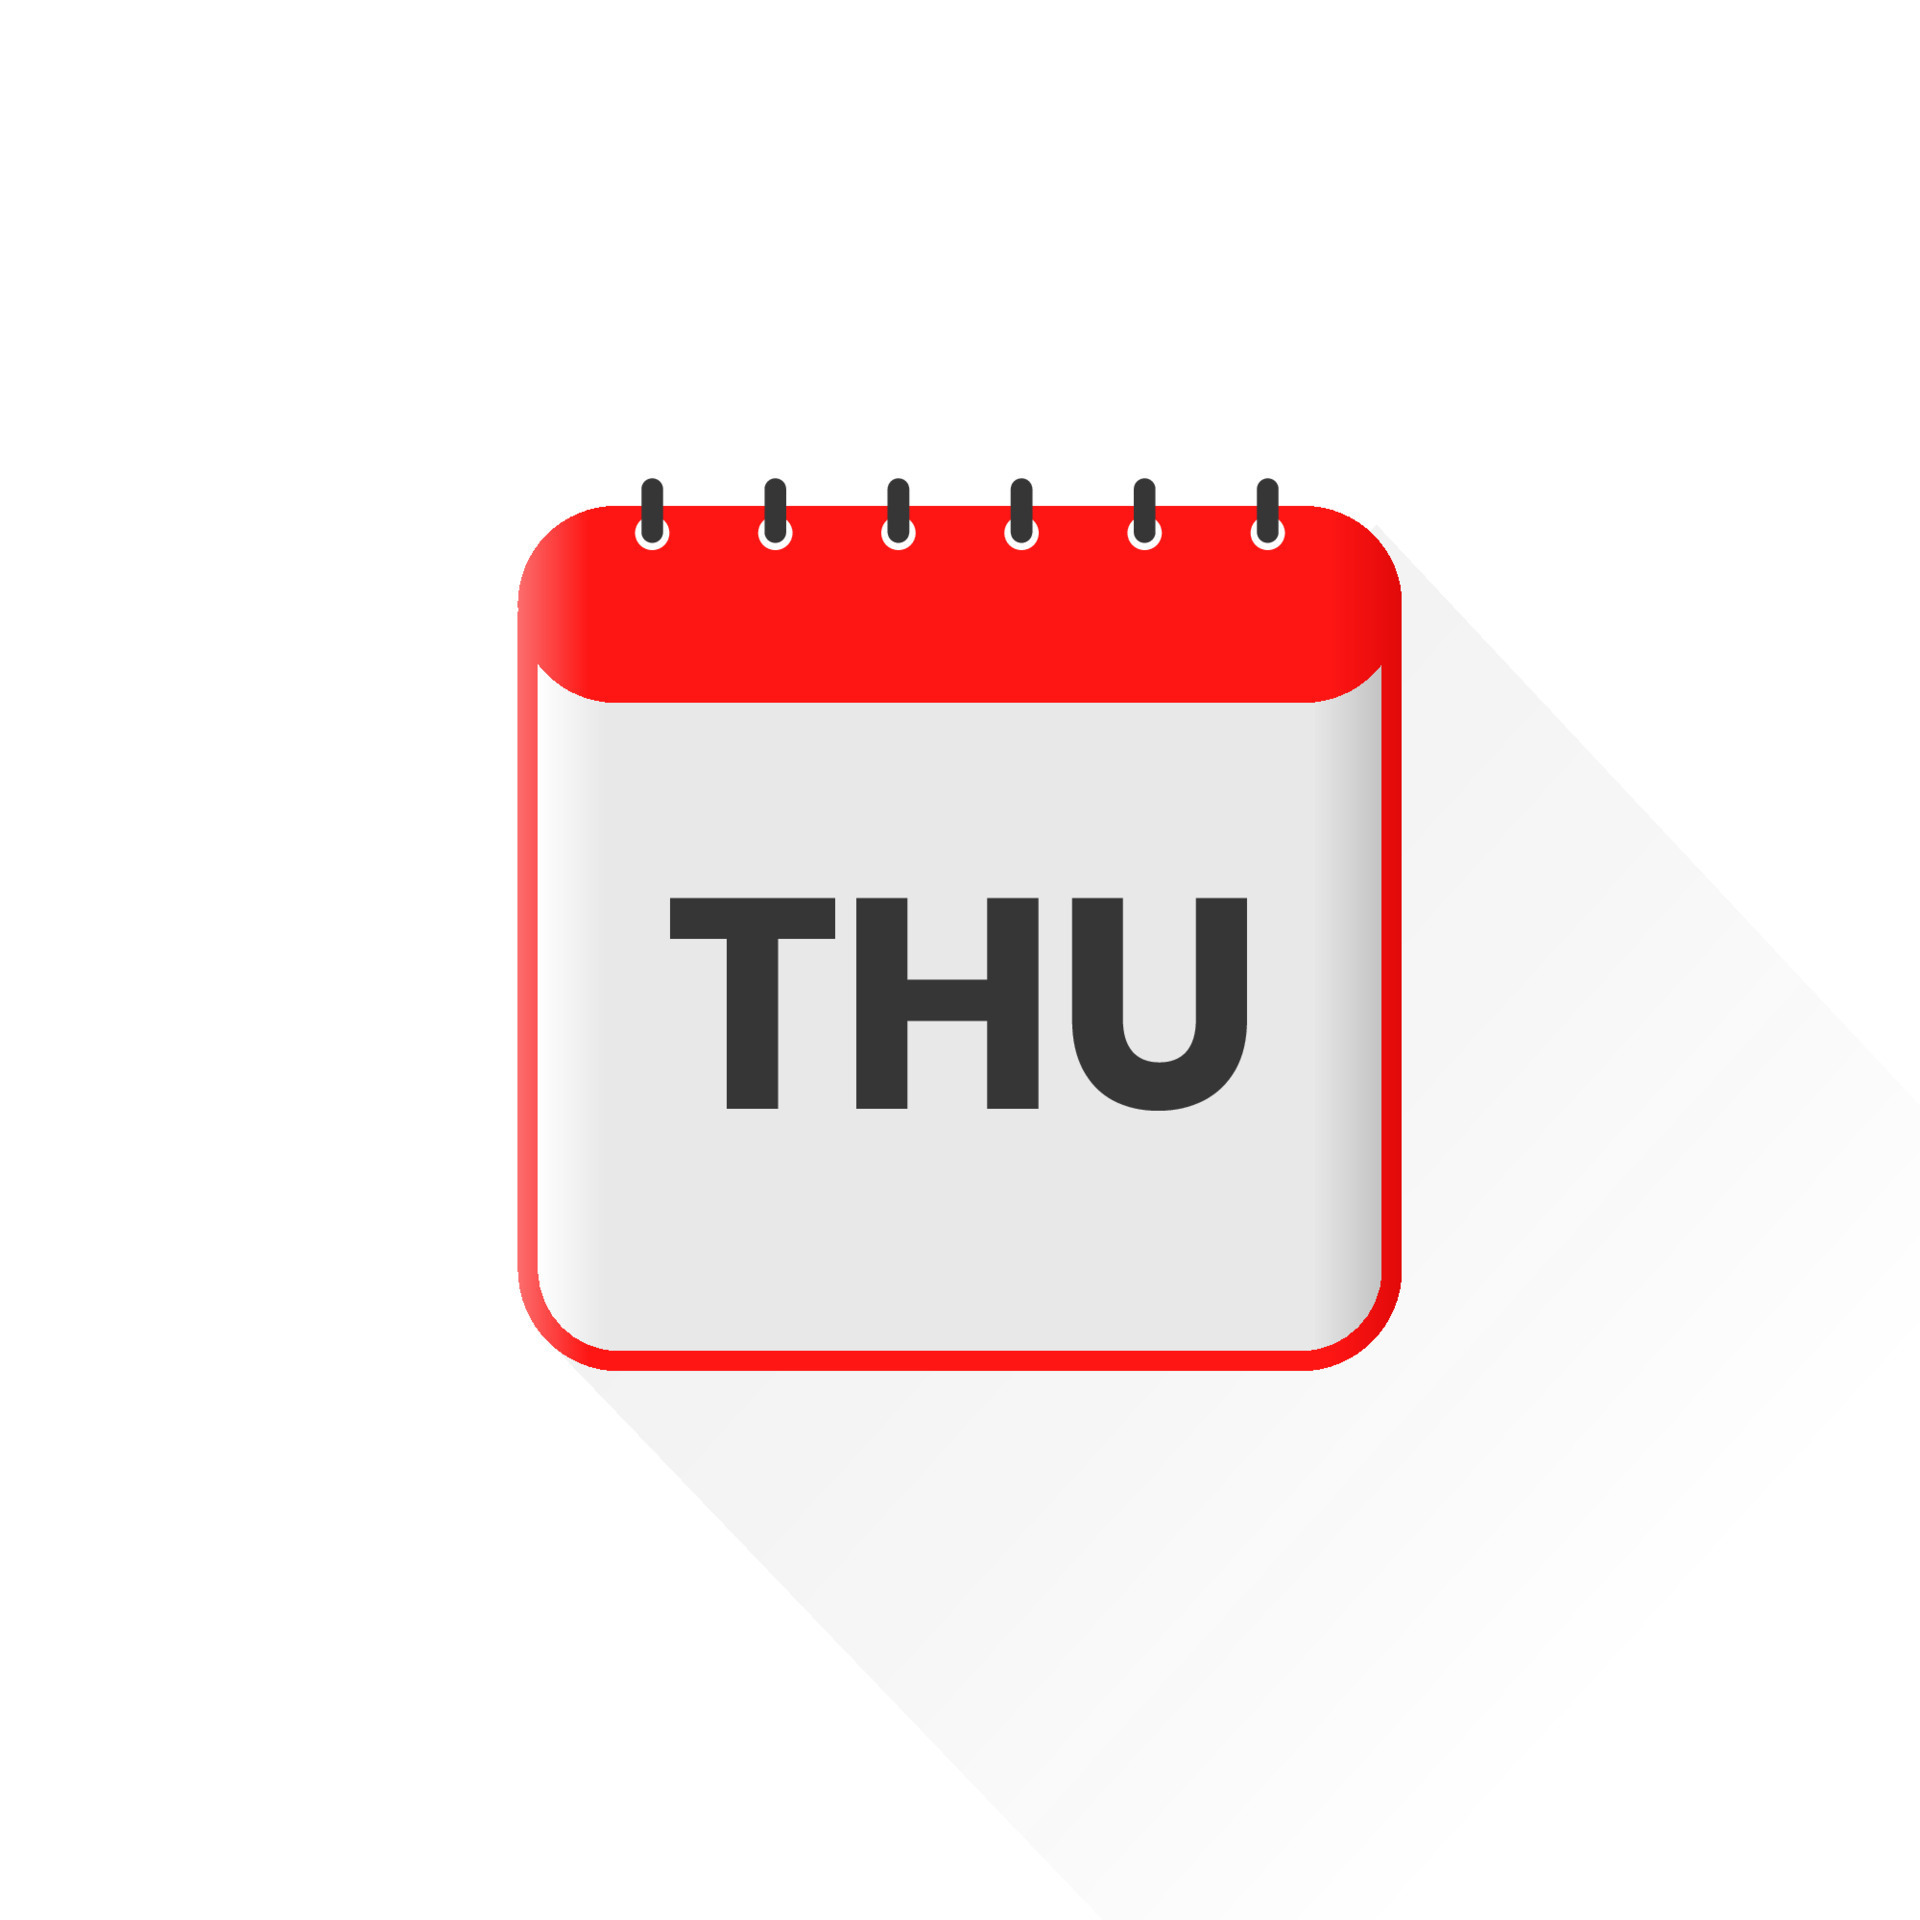 thursday-calendar-icon-day-of-the-week-for-schedule-work-sign-12932325-vector-art-at-vecteezy